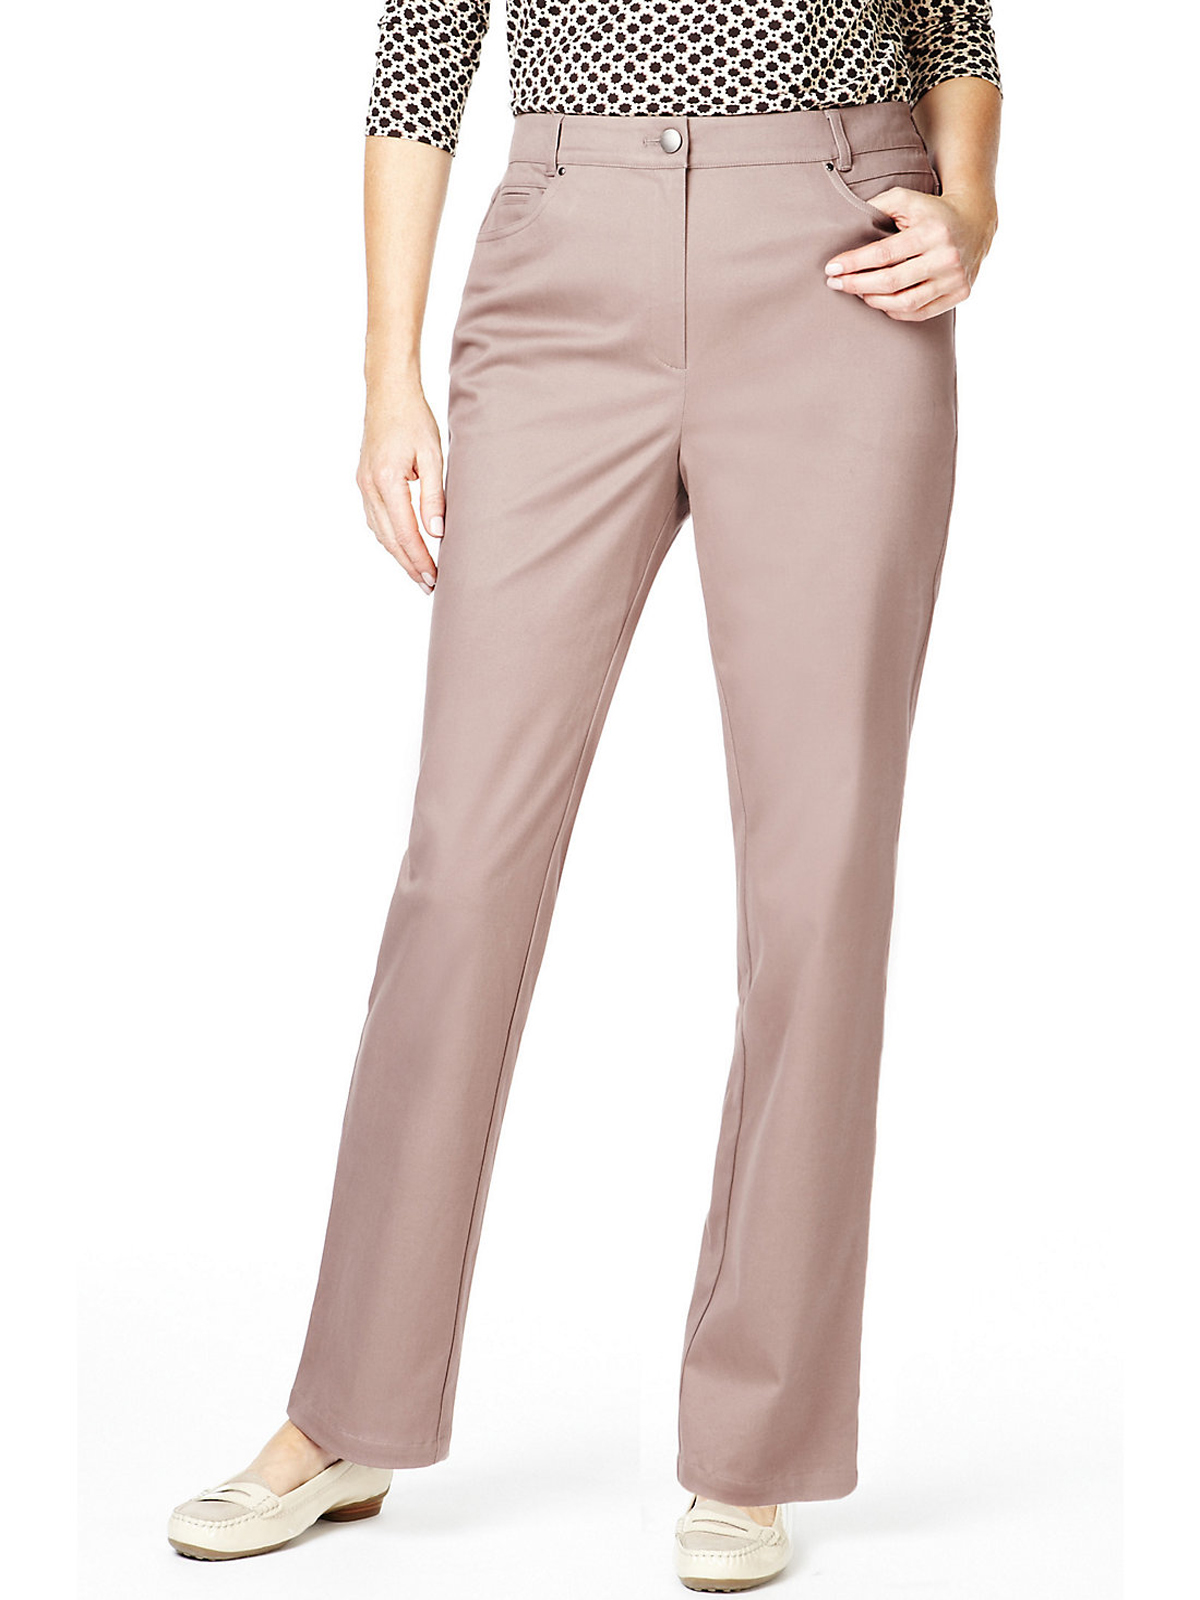 Marks and Spencer - - M&5 ASSORTED Ladies Trousers - Size 6 to 18